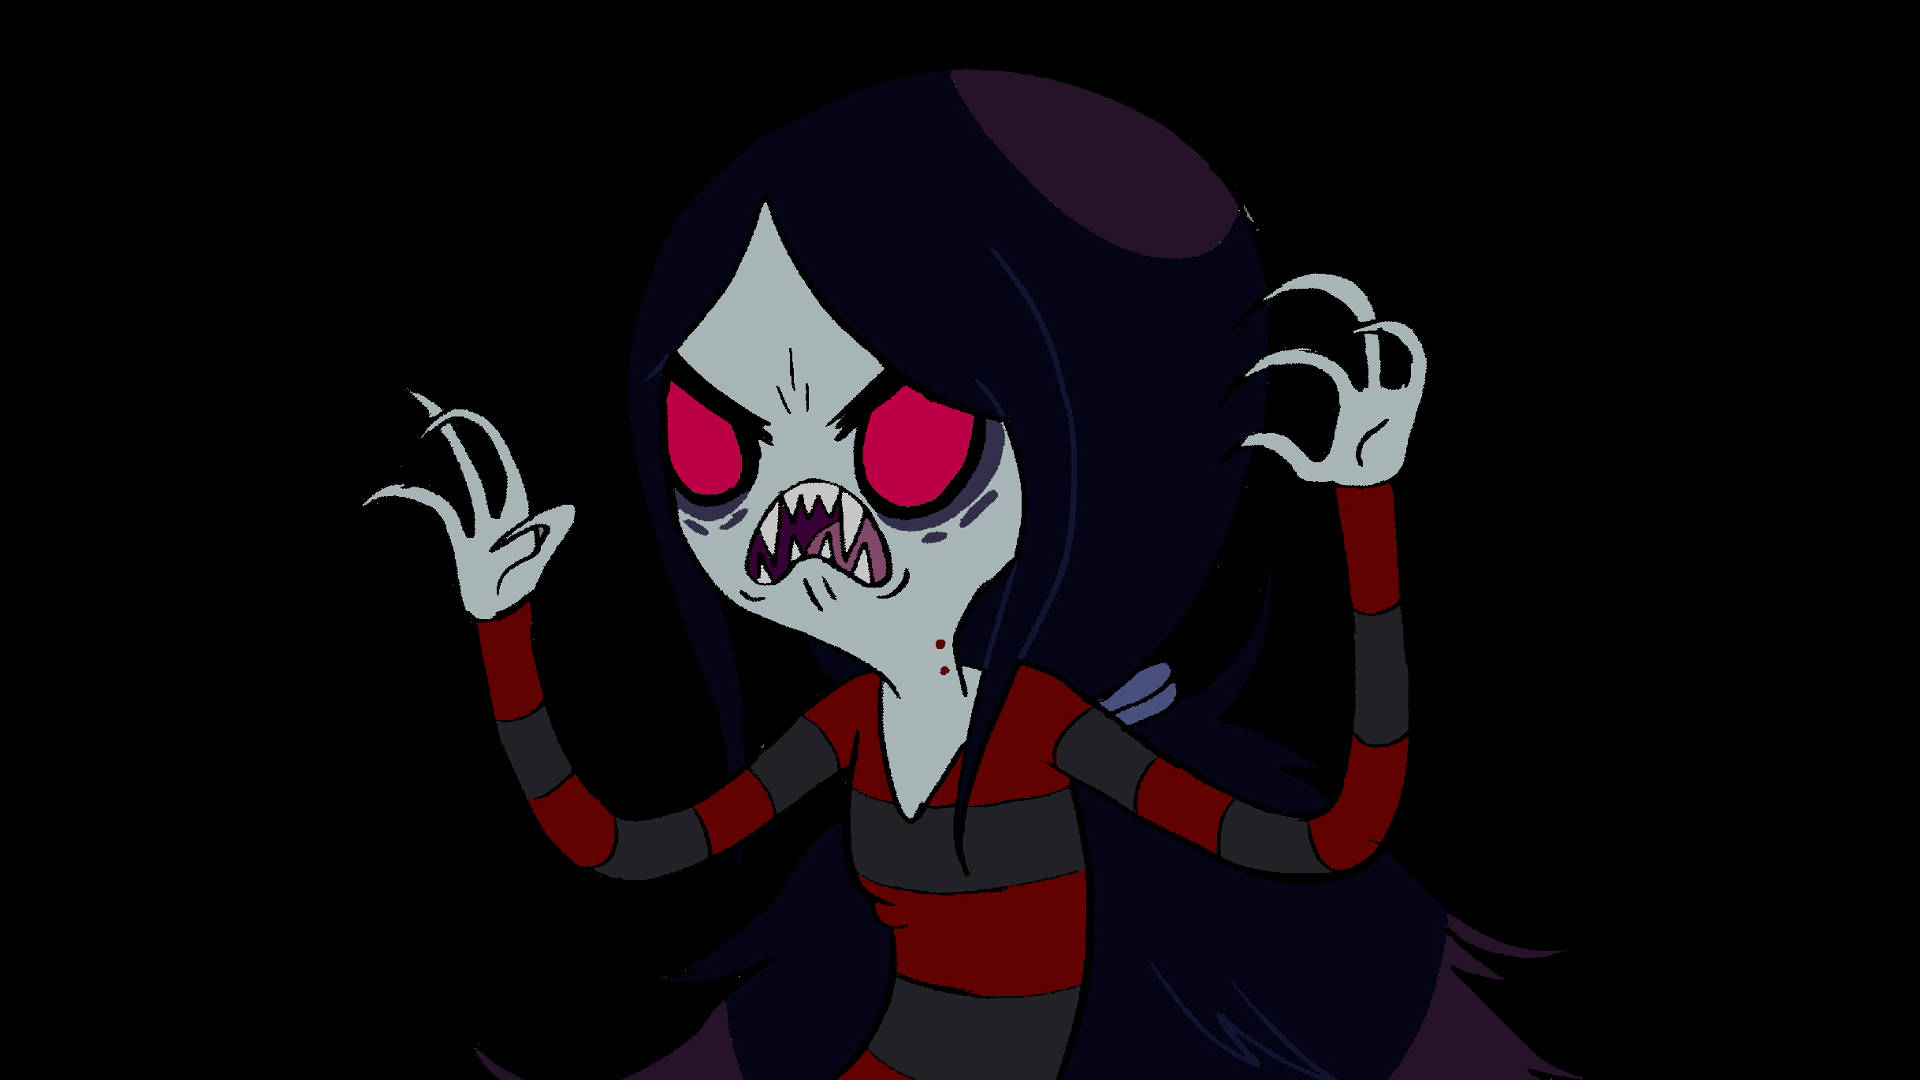 Scary Angry Vampire Queen Marceline